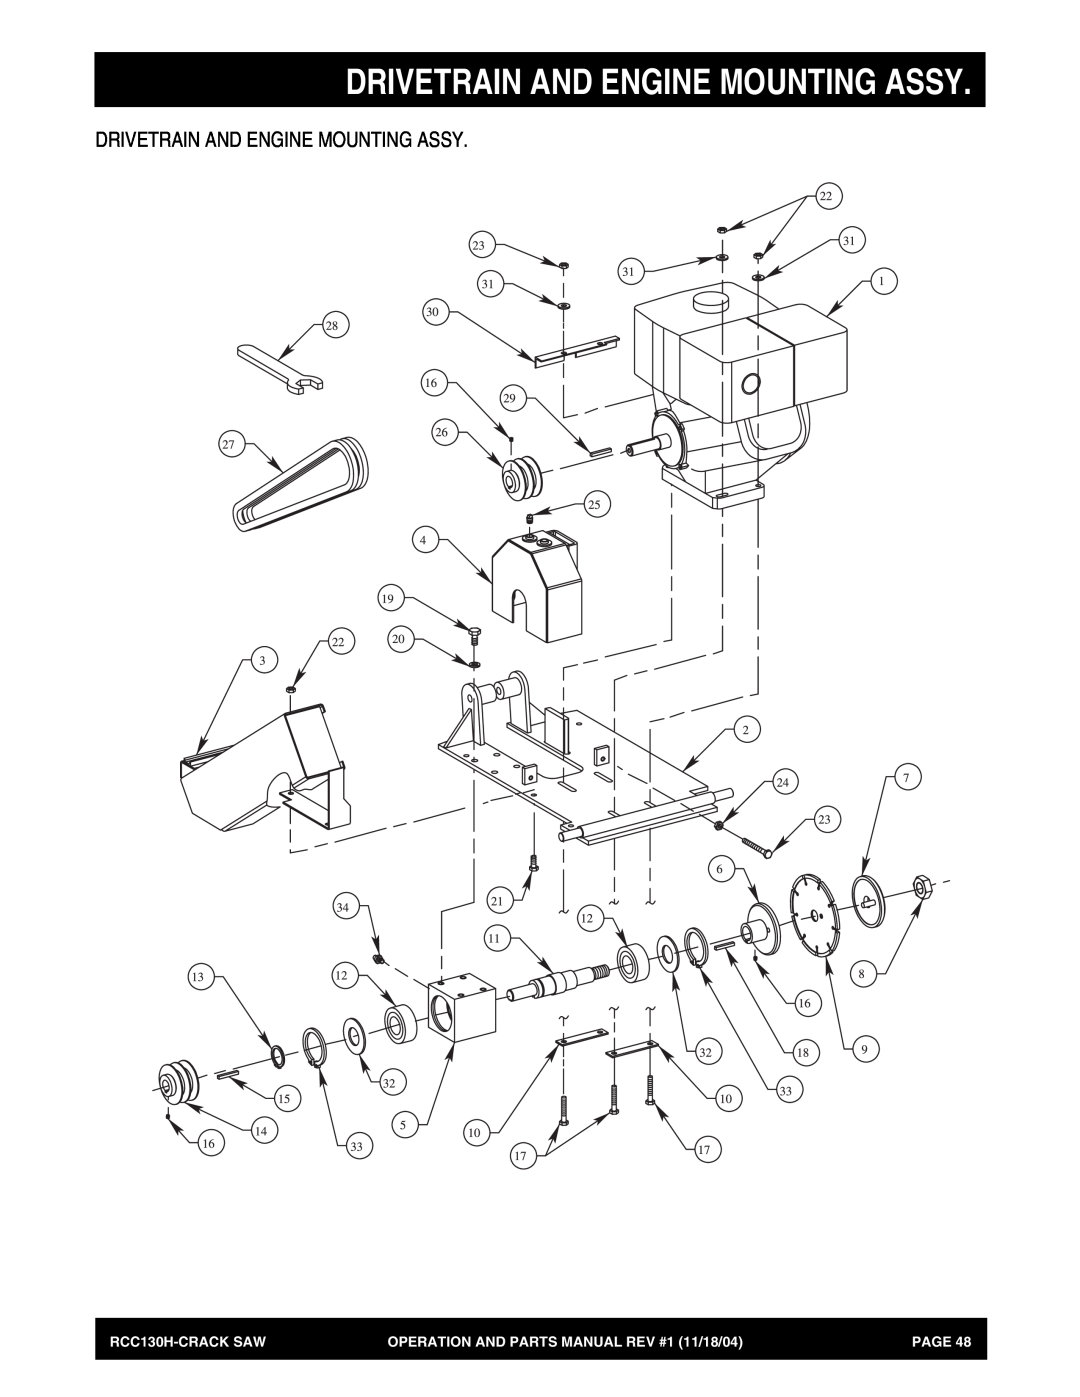 Stow manual Drivetrain And Engine Mounting Assy, RCC130H-CRACK SAW, OPERATION AND PARTS MANUAL REV #1 11/18/04, Page 